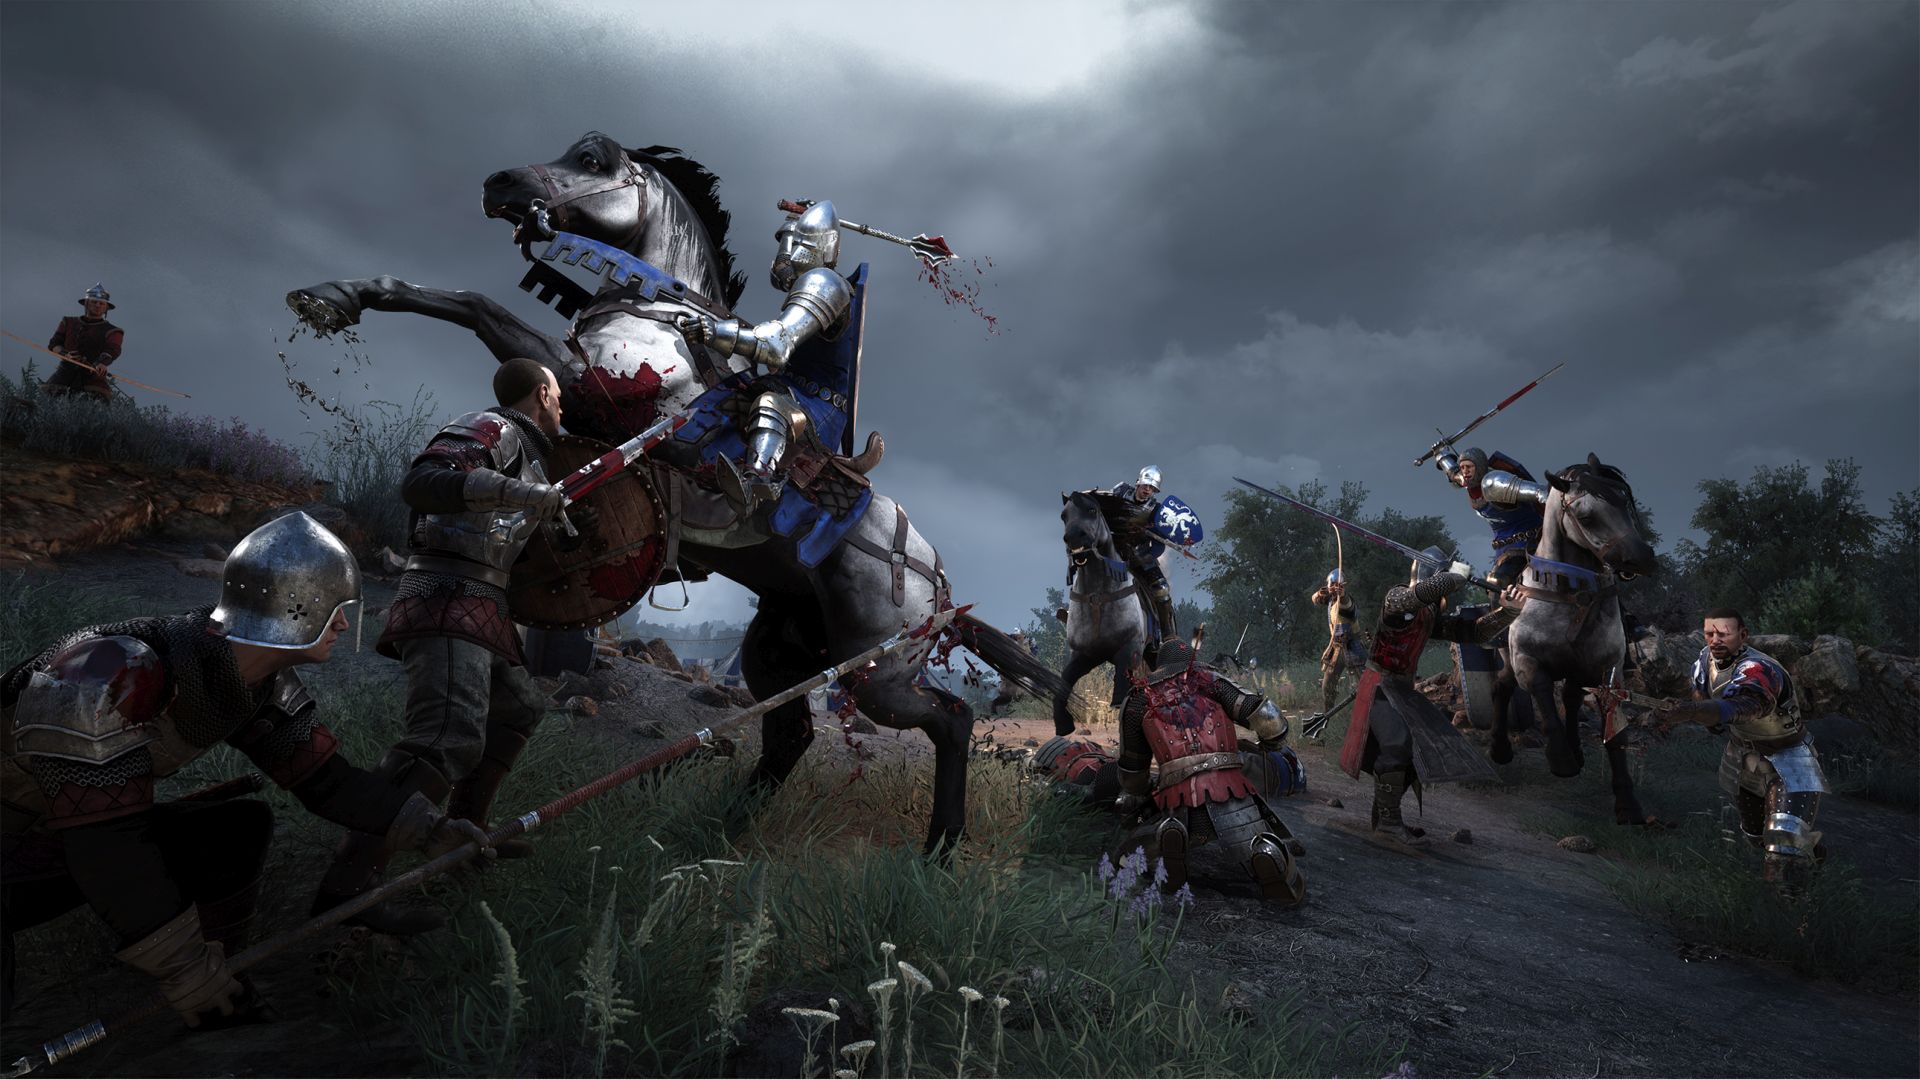 Chivalry 2 Delayed To 2021, Will Feature More Content At Launch